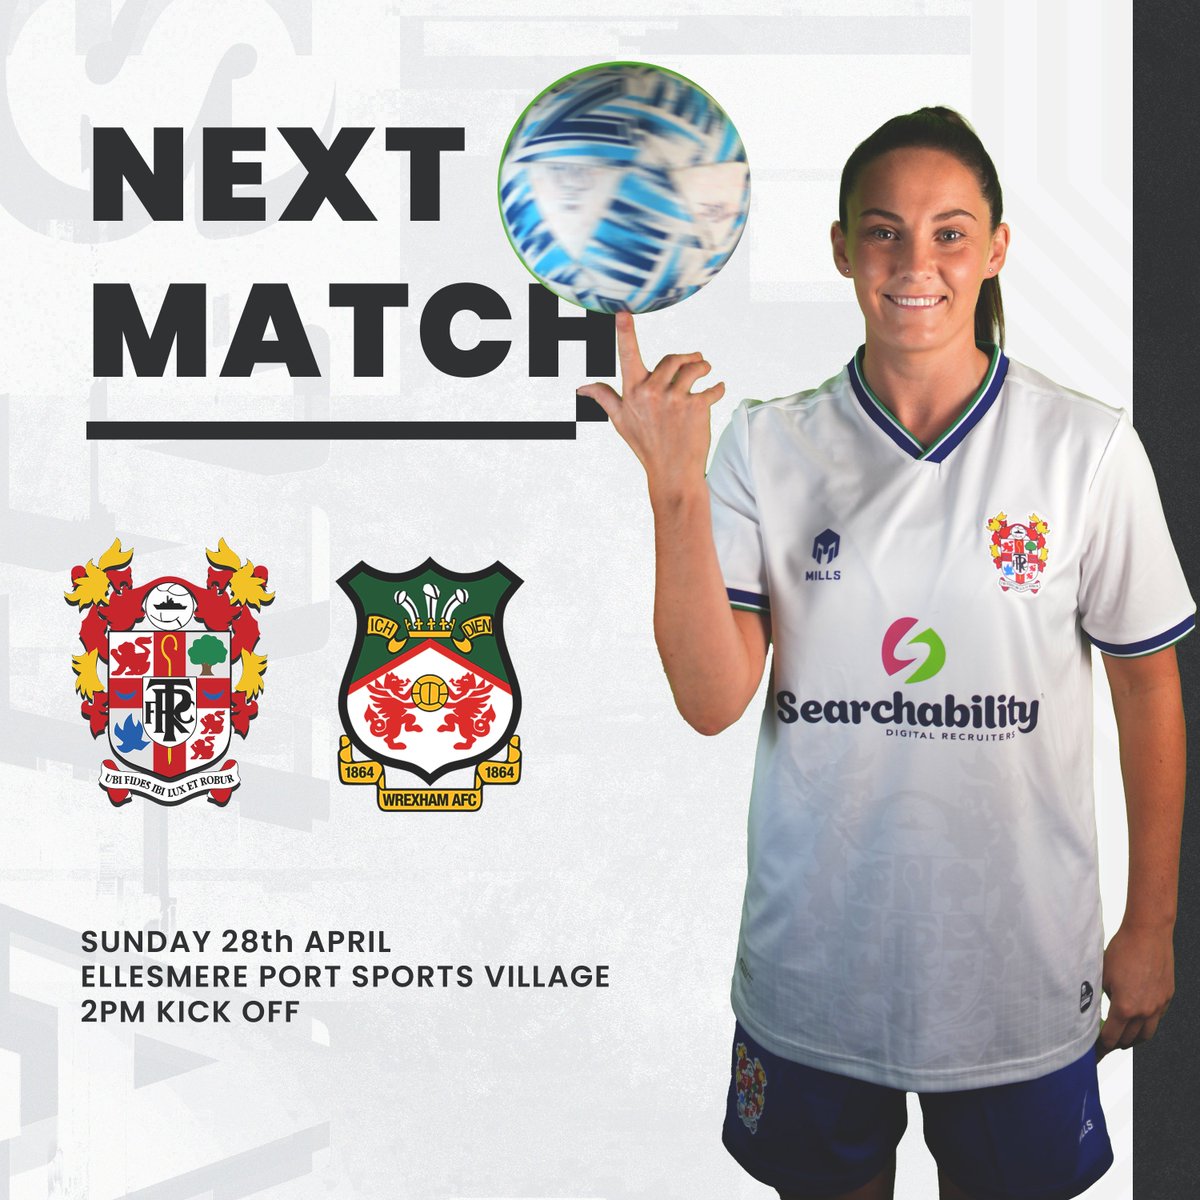 📅The First Team face a visit from Wrexham AFC in an end of season friendly this Sunday. #TRFC #SWA